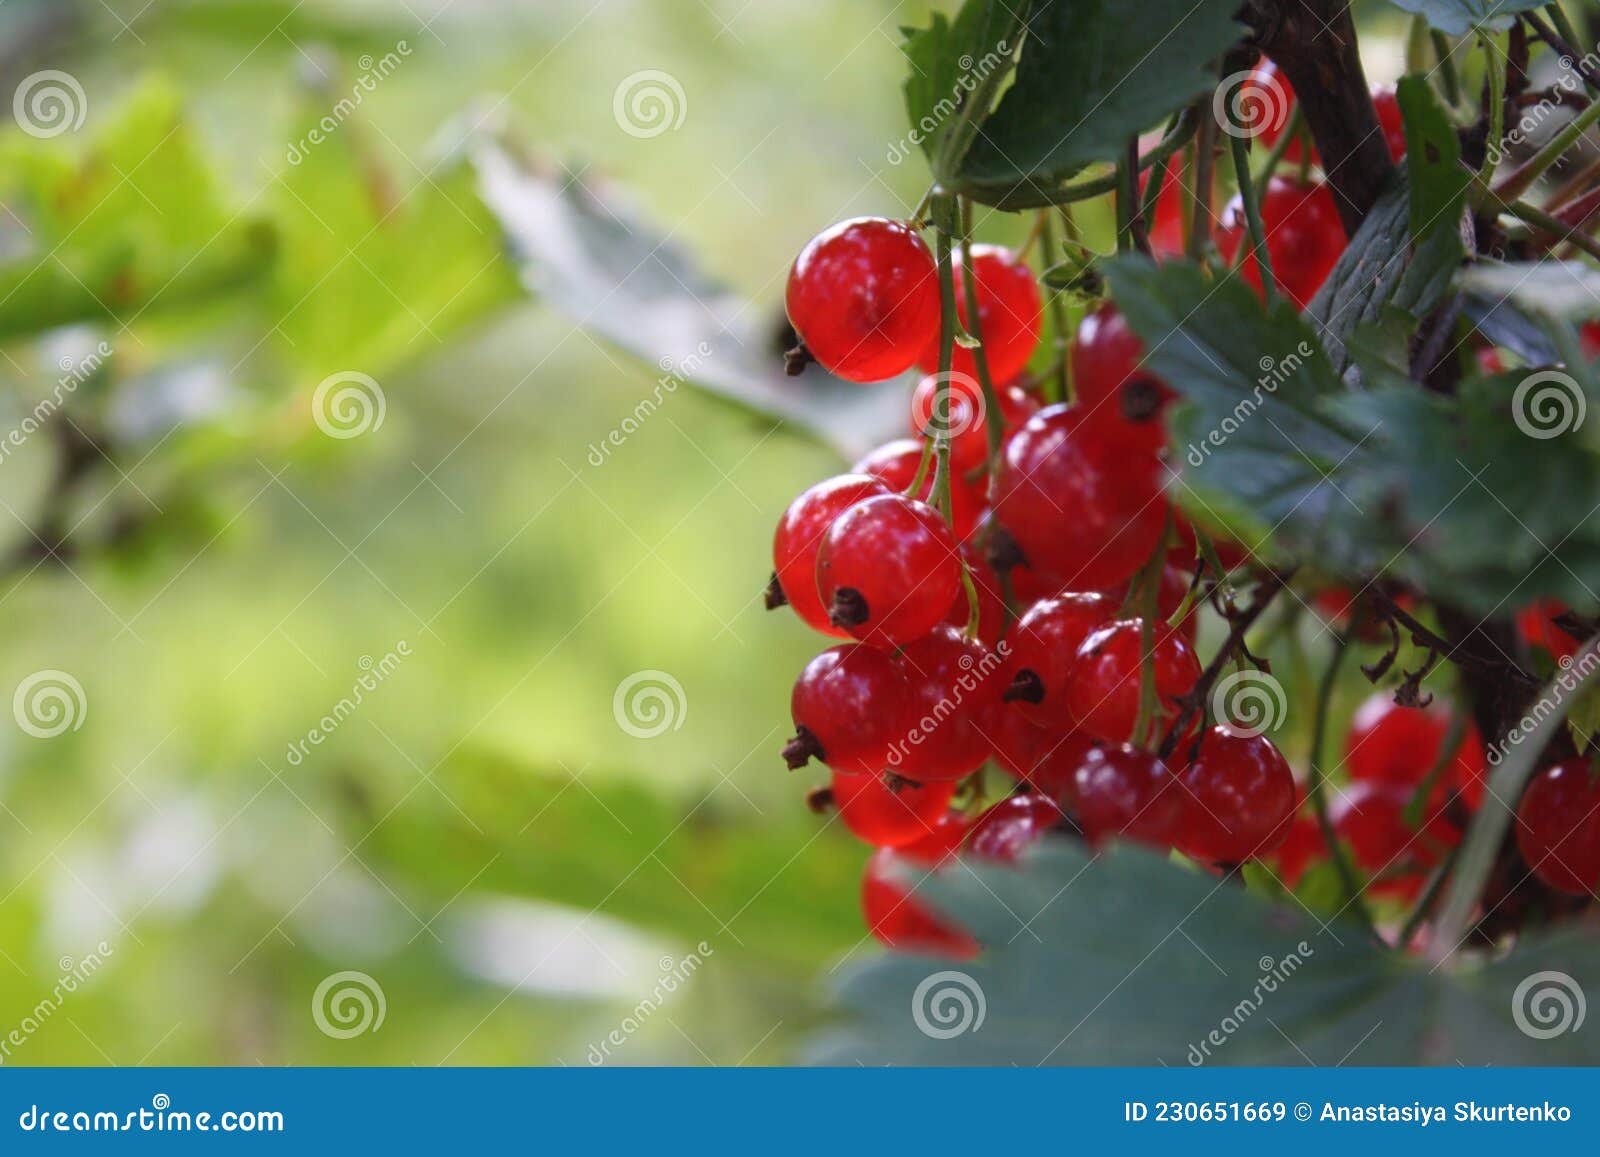 red currant in my garden